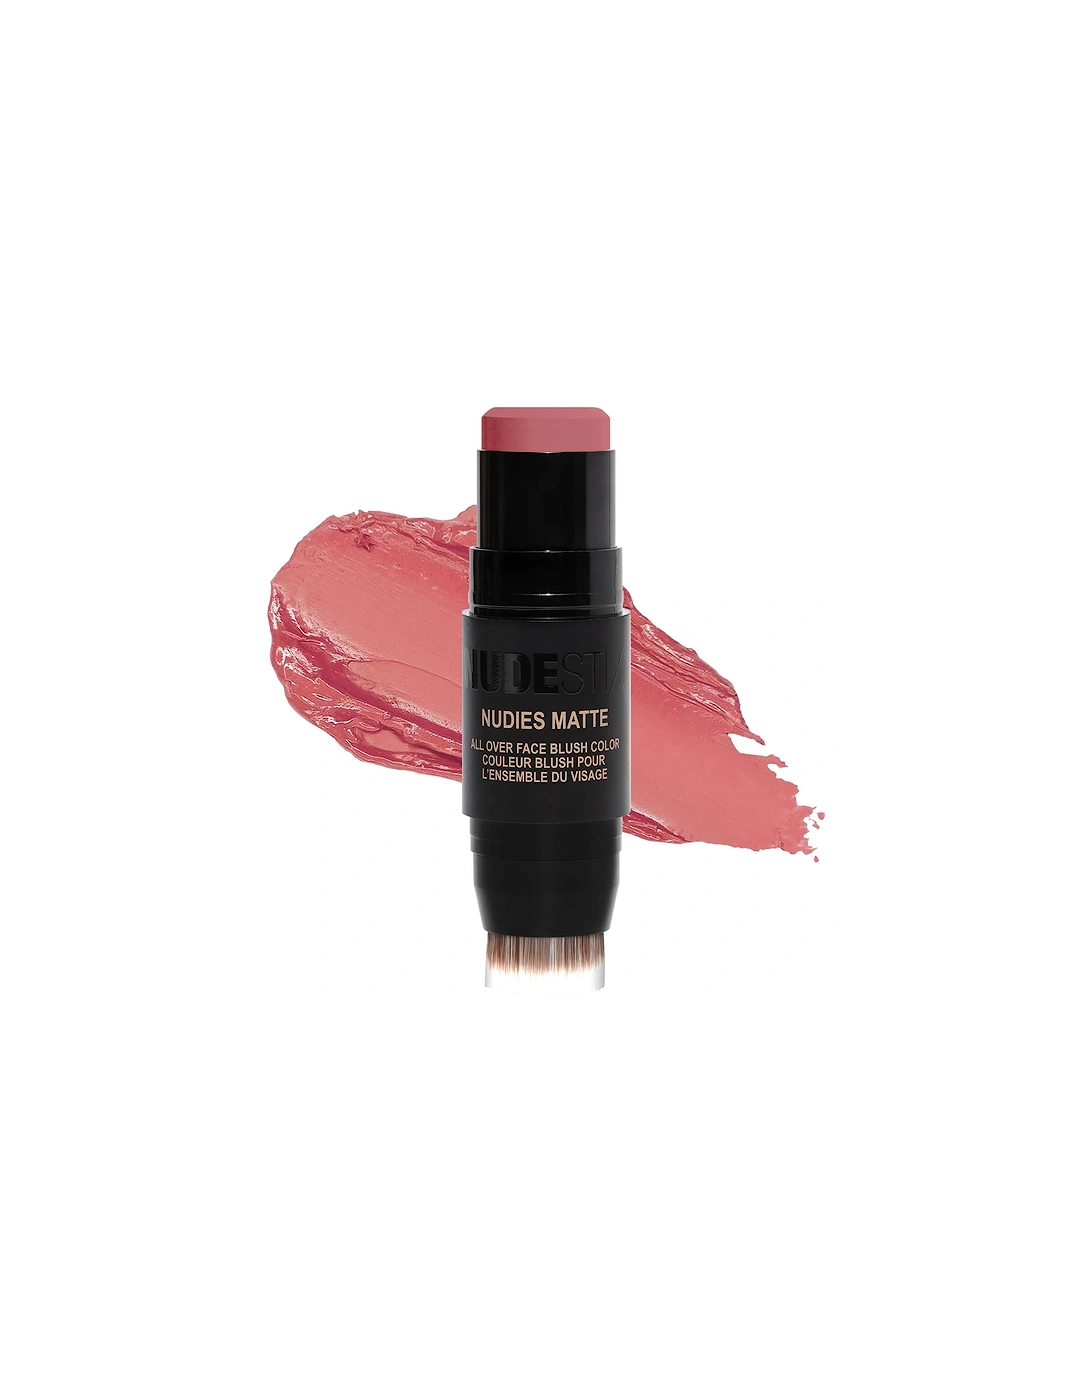 Nudies Matte All Over Face Blush Color - Cherie, 2 of 1